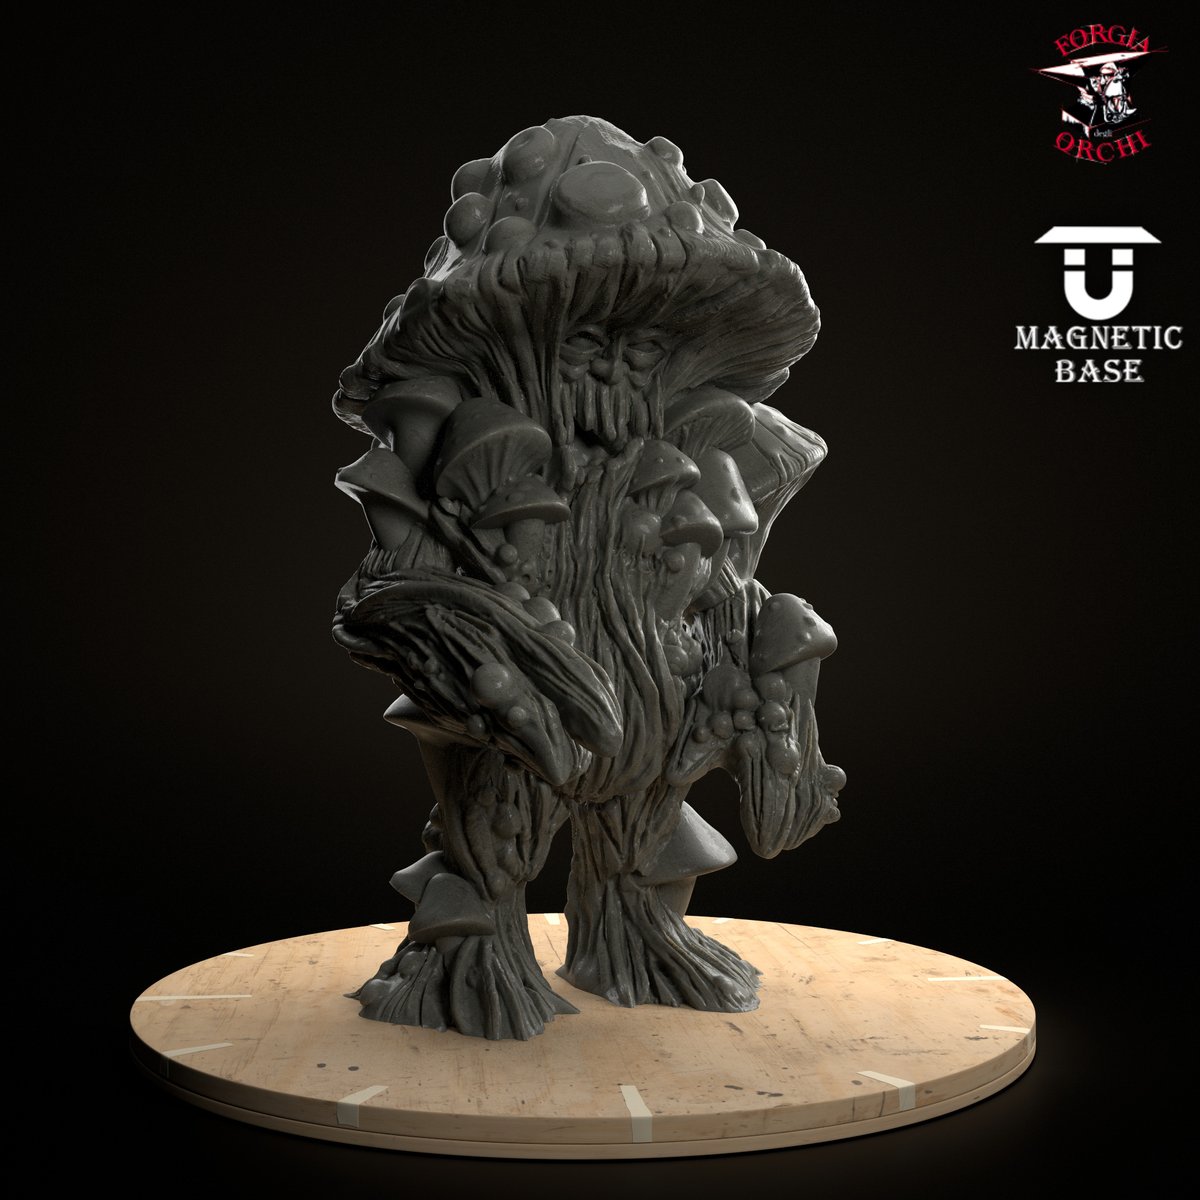 Myconid
3D model by Bryan Nafarrate (gumroad.com/nafarrate)
Buy it on our site forgiadegliorchi.it #3dPrinting #3dModeling #miniature #rpg #tabletopminiatures #tabletopgames #roleplayinggame #roleplaygame #dungeonsanddragons #dndminiatures #resinprintint